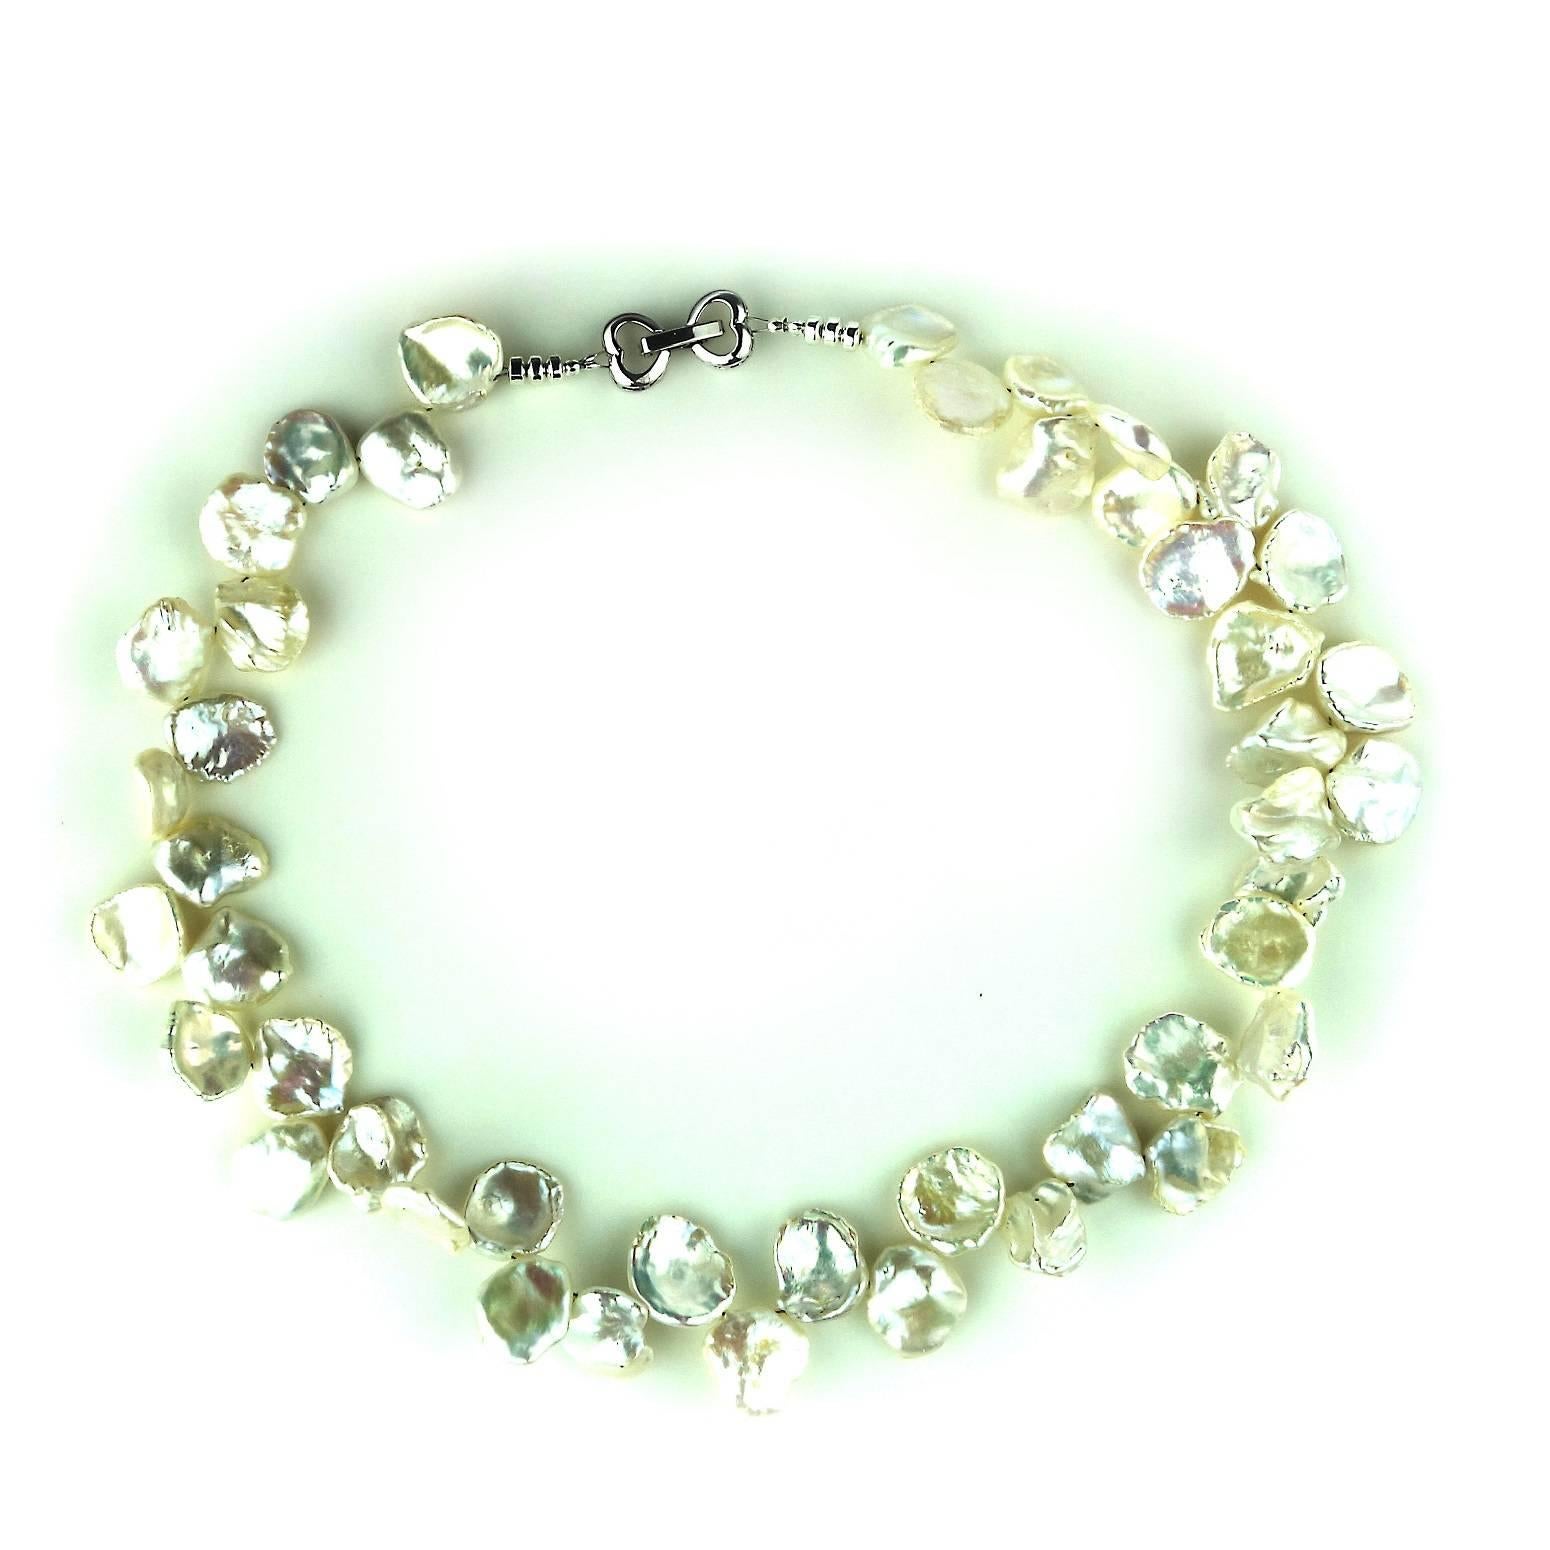 14 inch pearl necklace